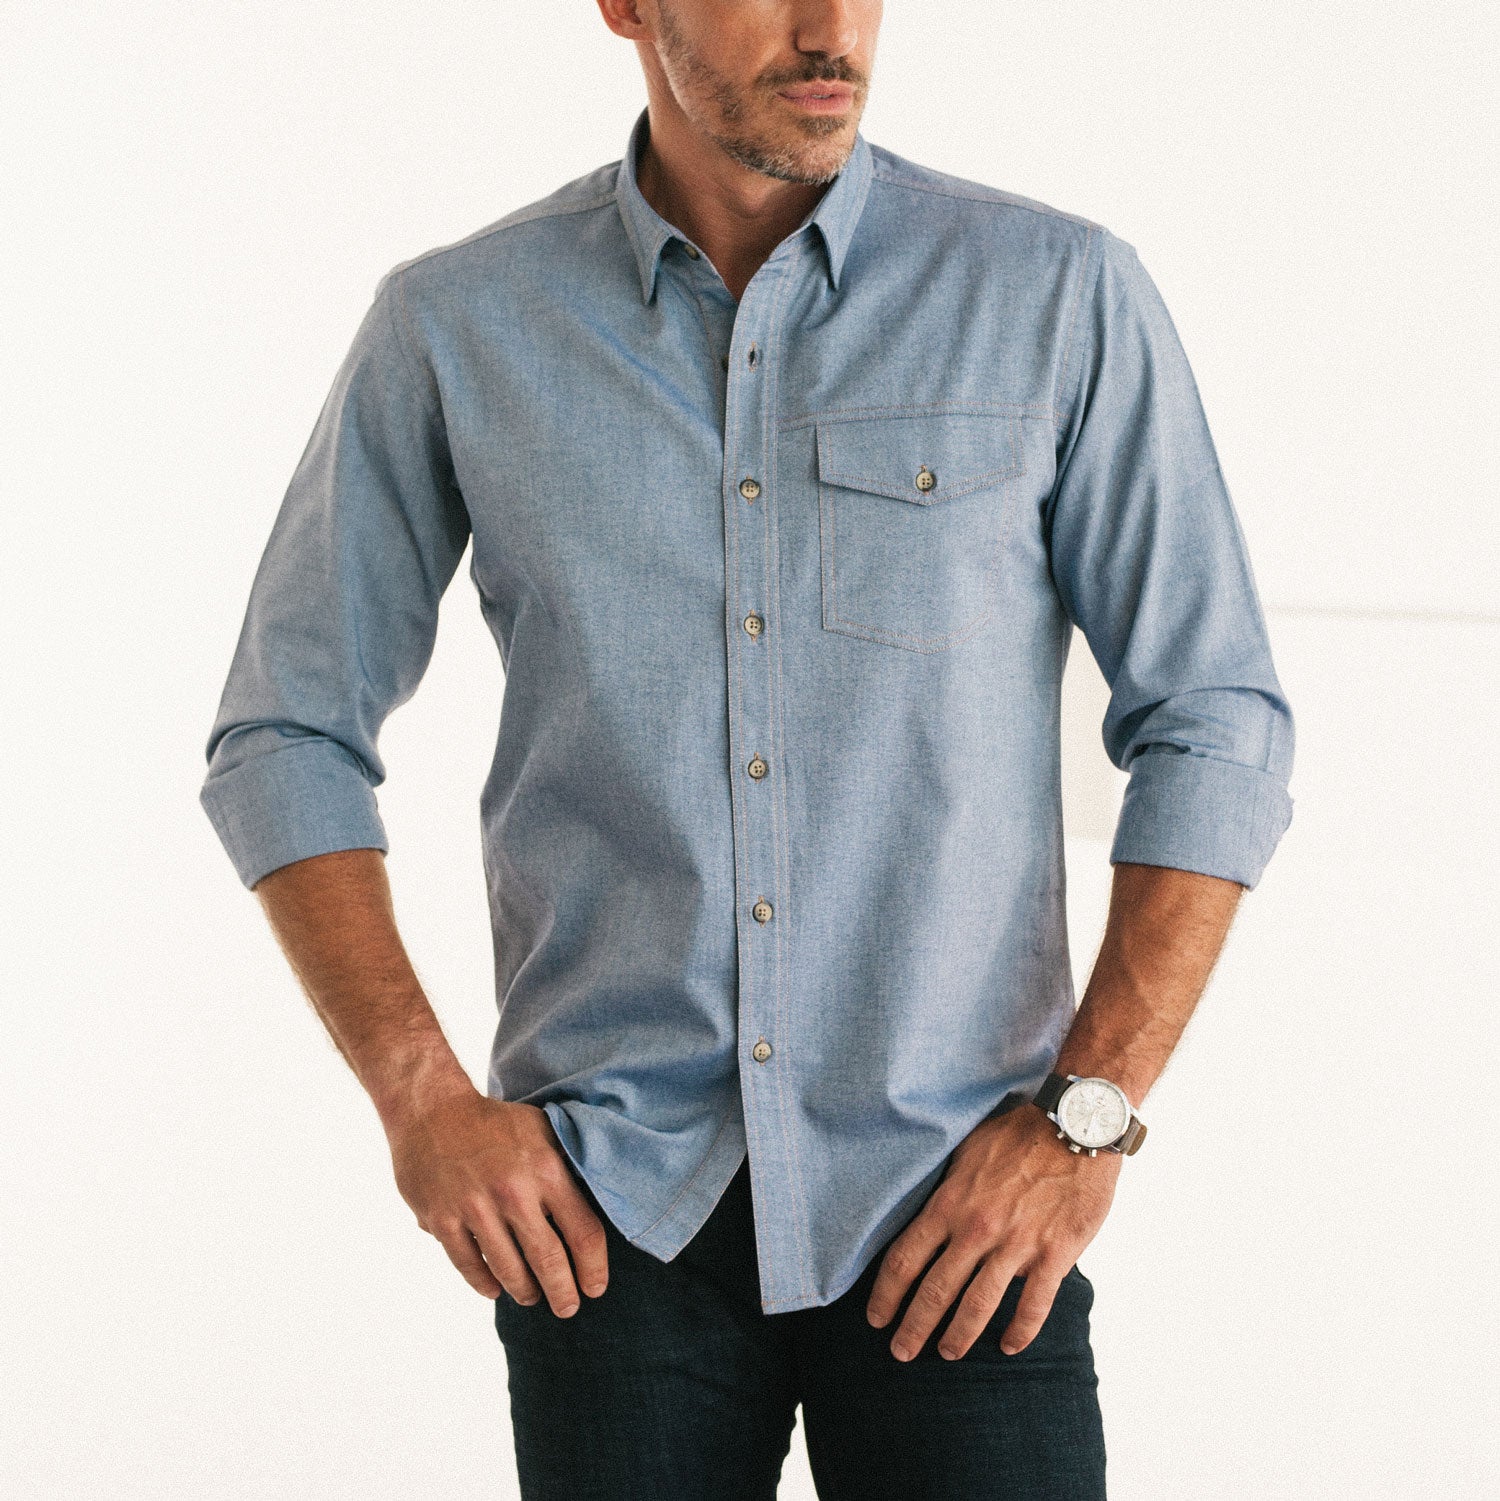 Men's Casual Shirt - Author in Harbor Blue Oxford | Batch